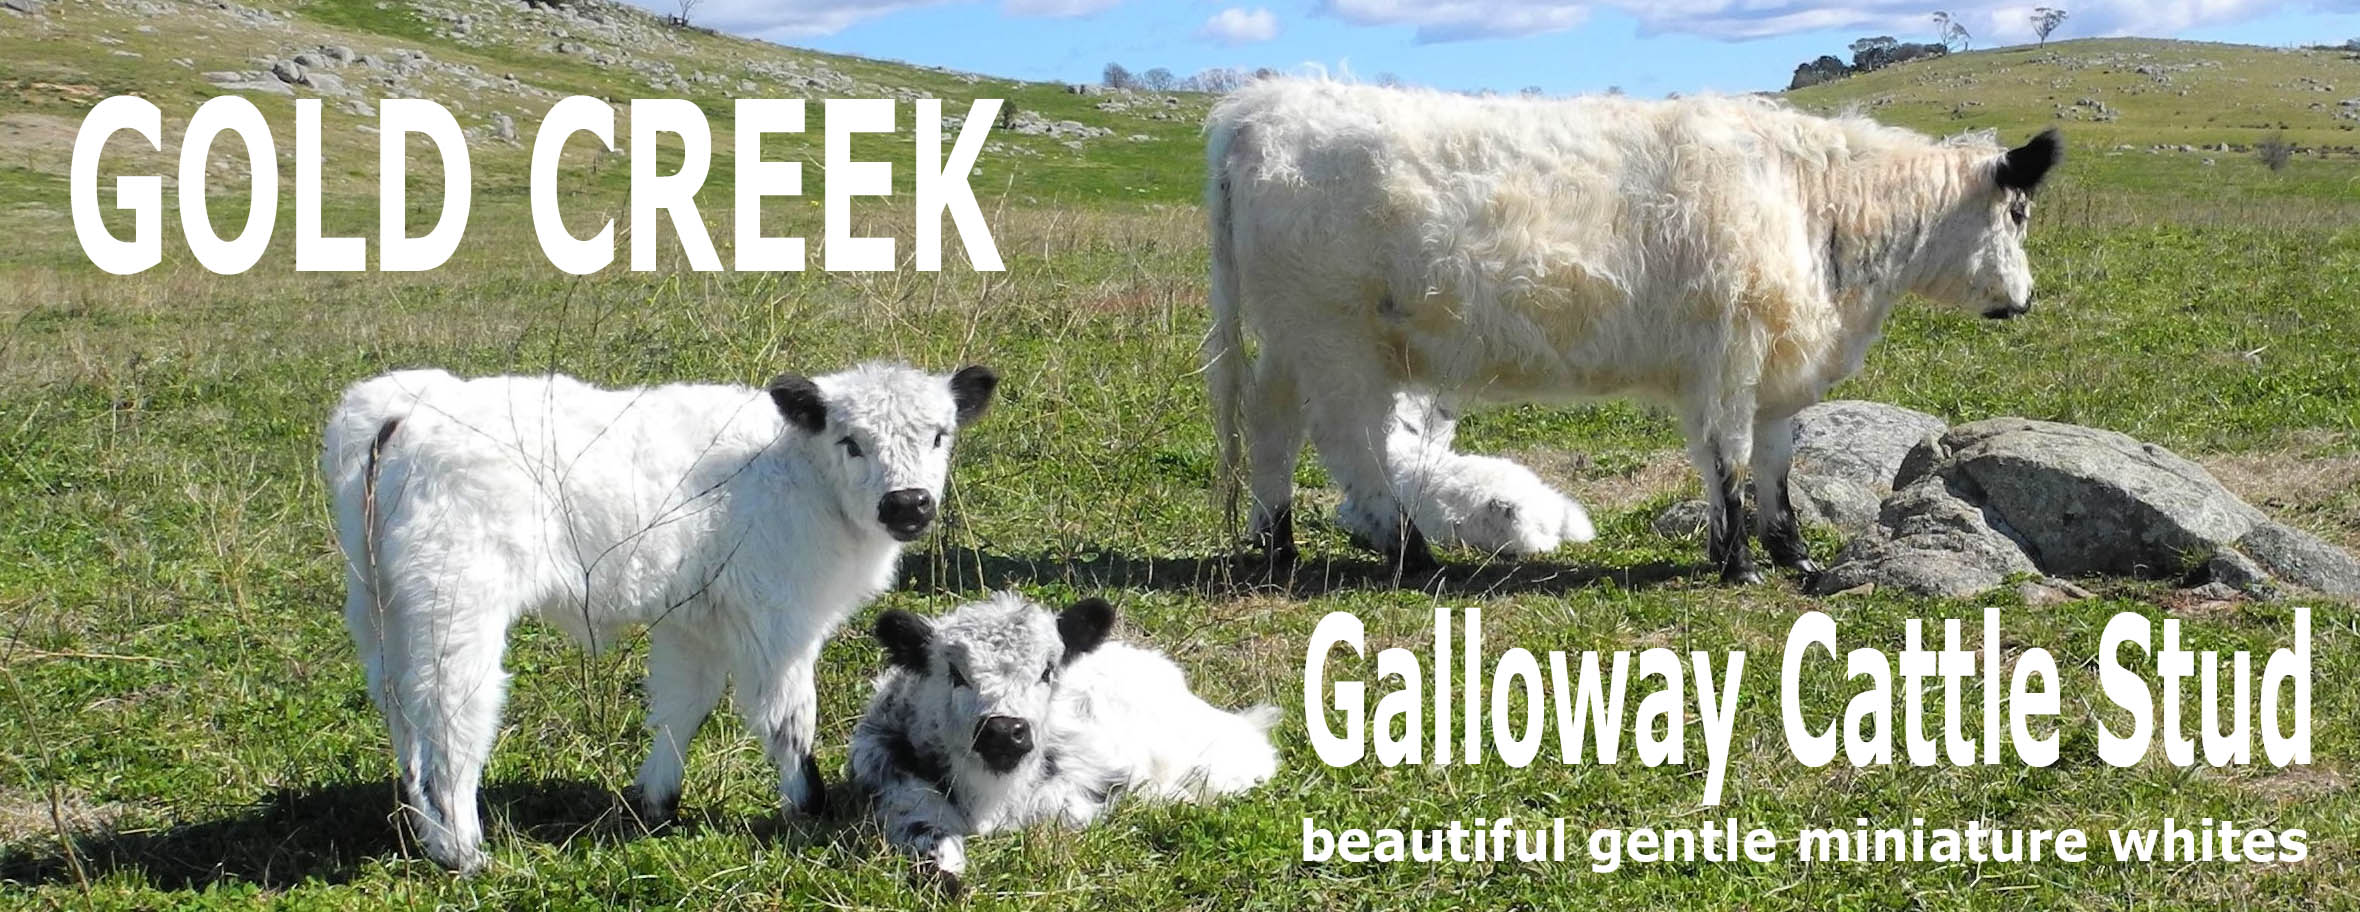 Miniature Cattle Traditional Galloway